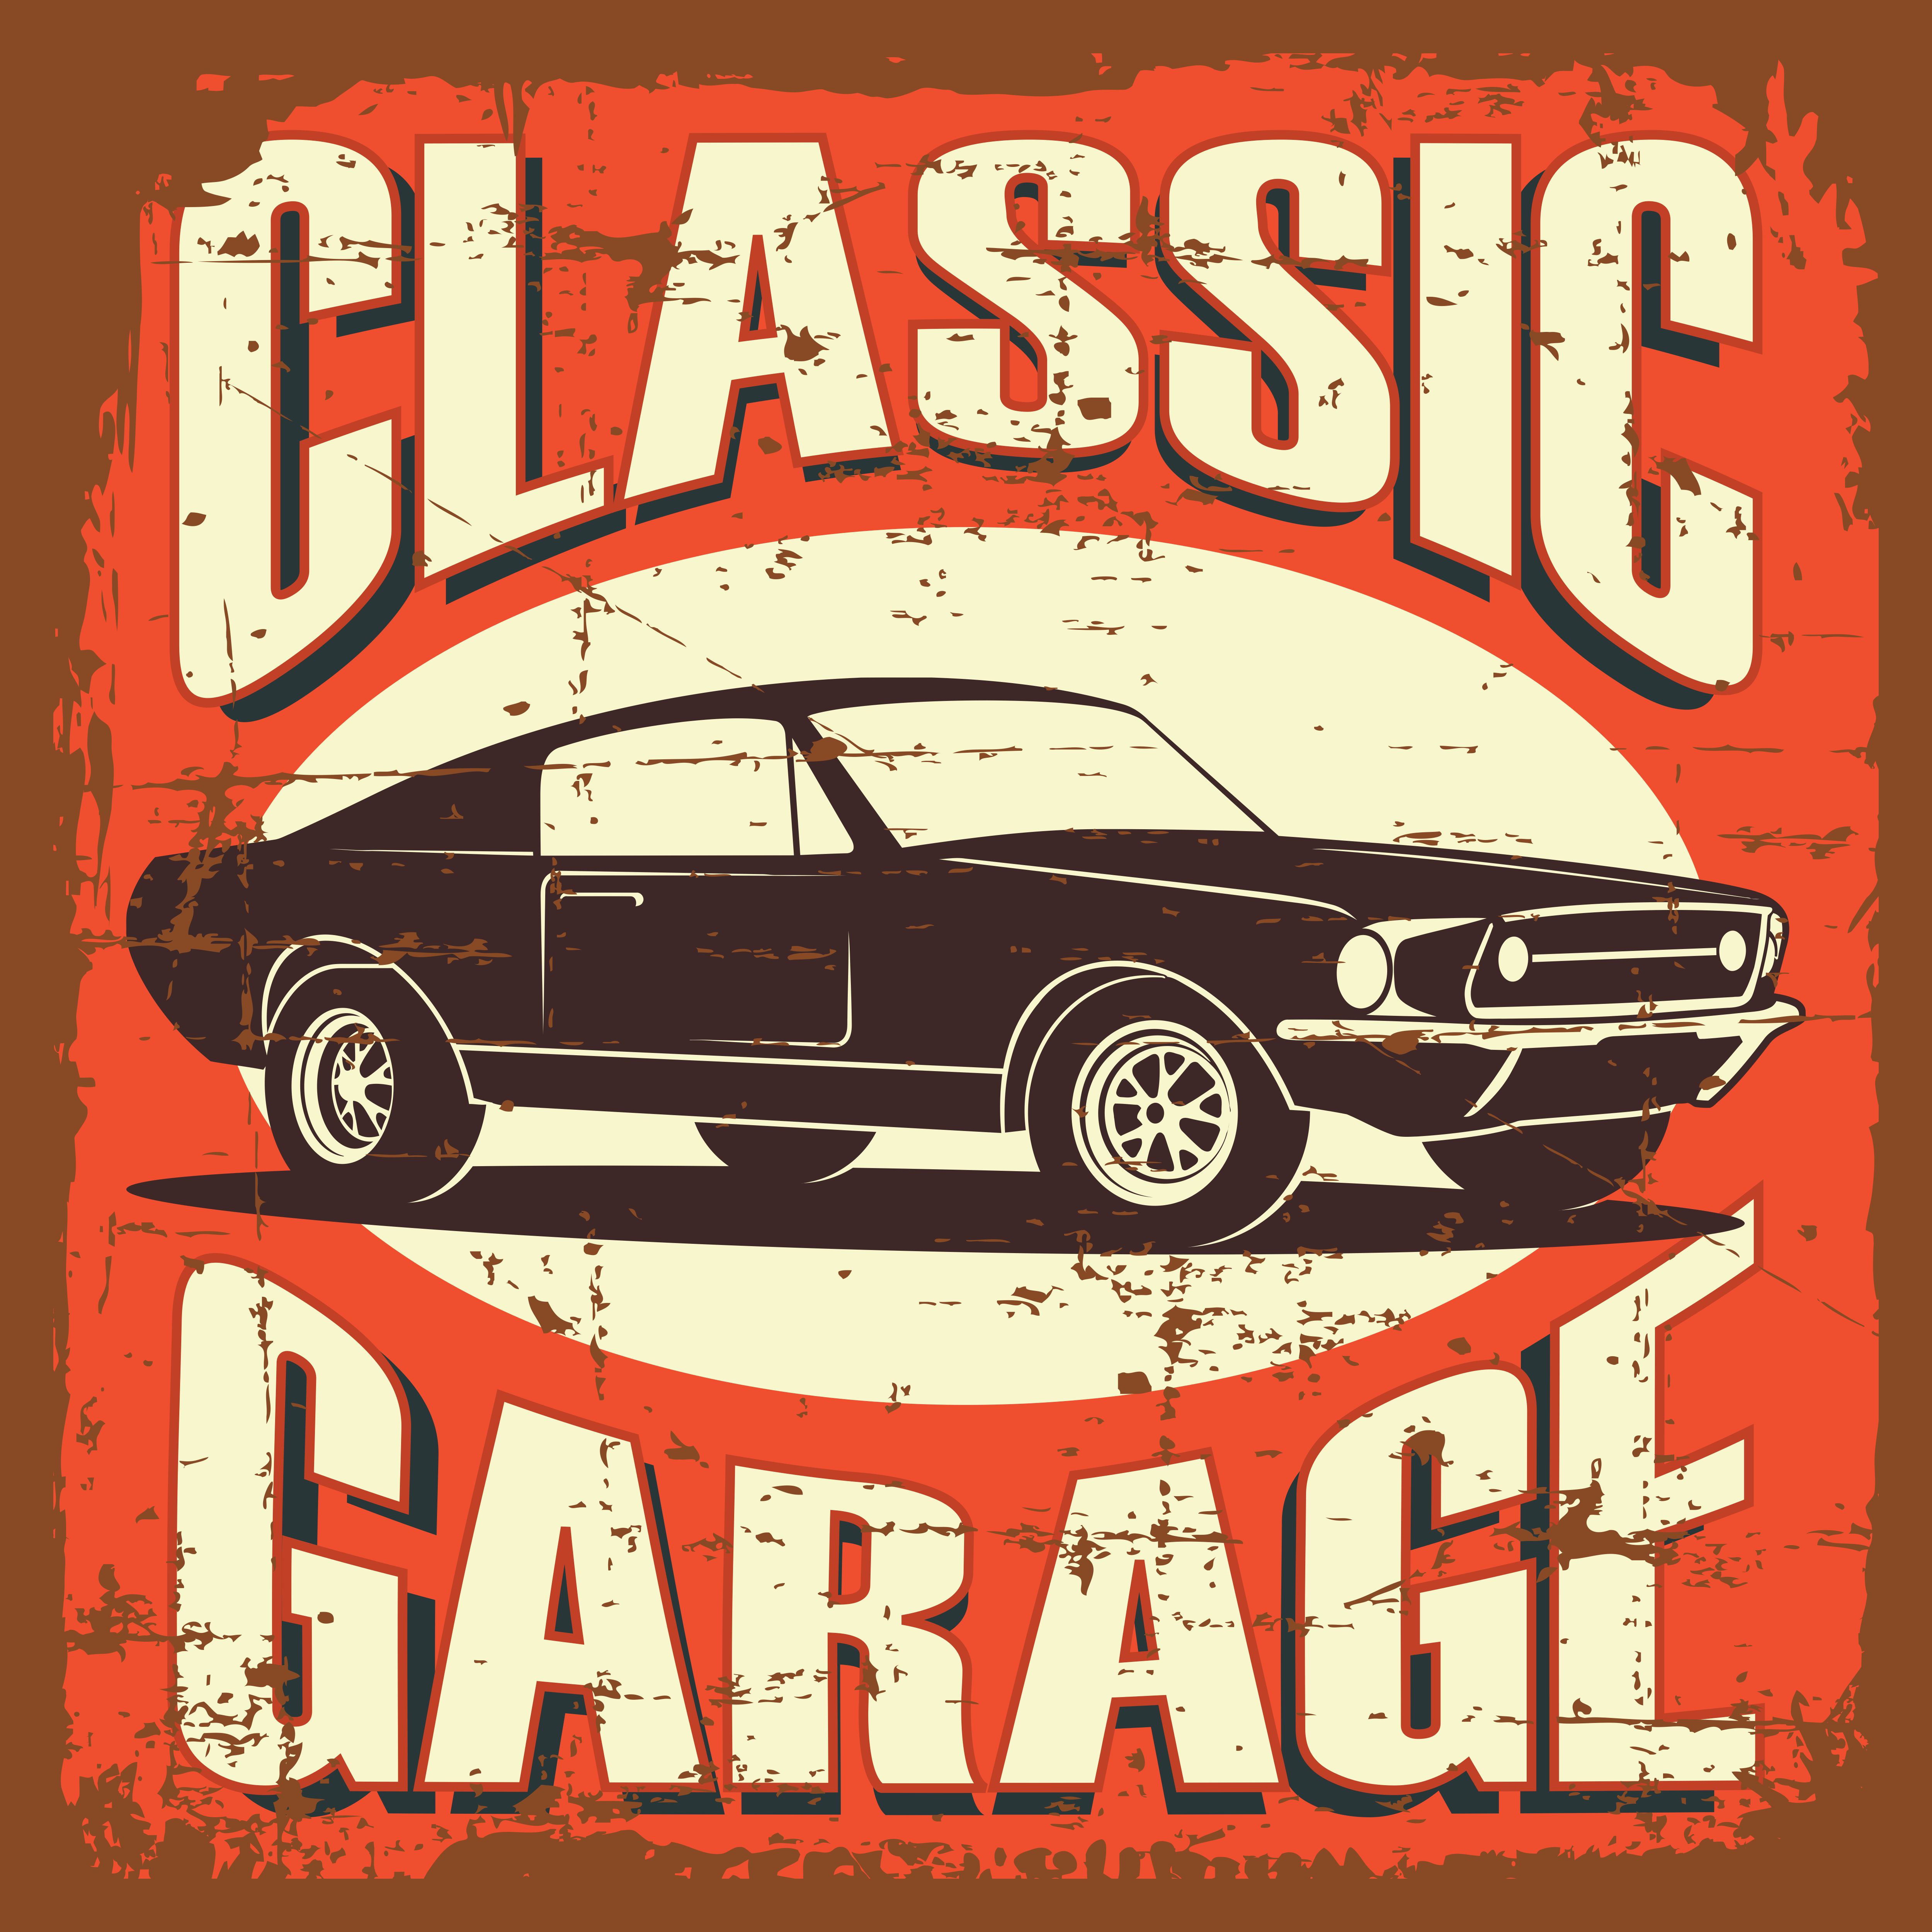 Vector illustration with the image of an old classic car, design logos